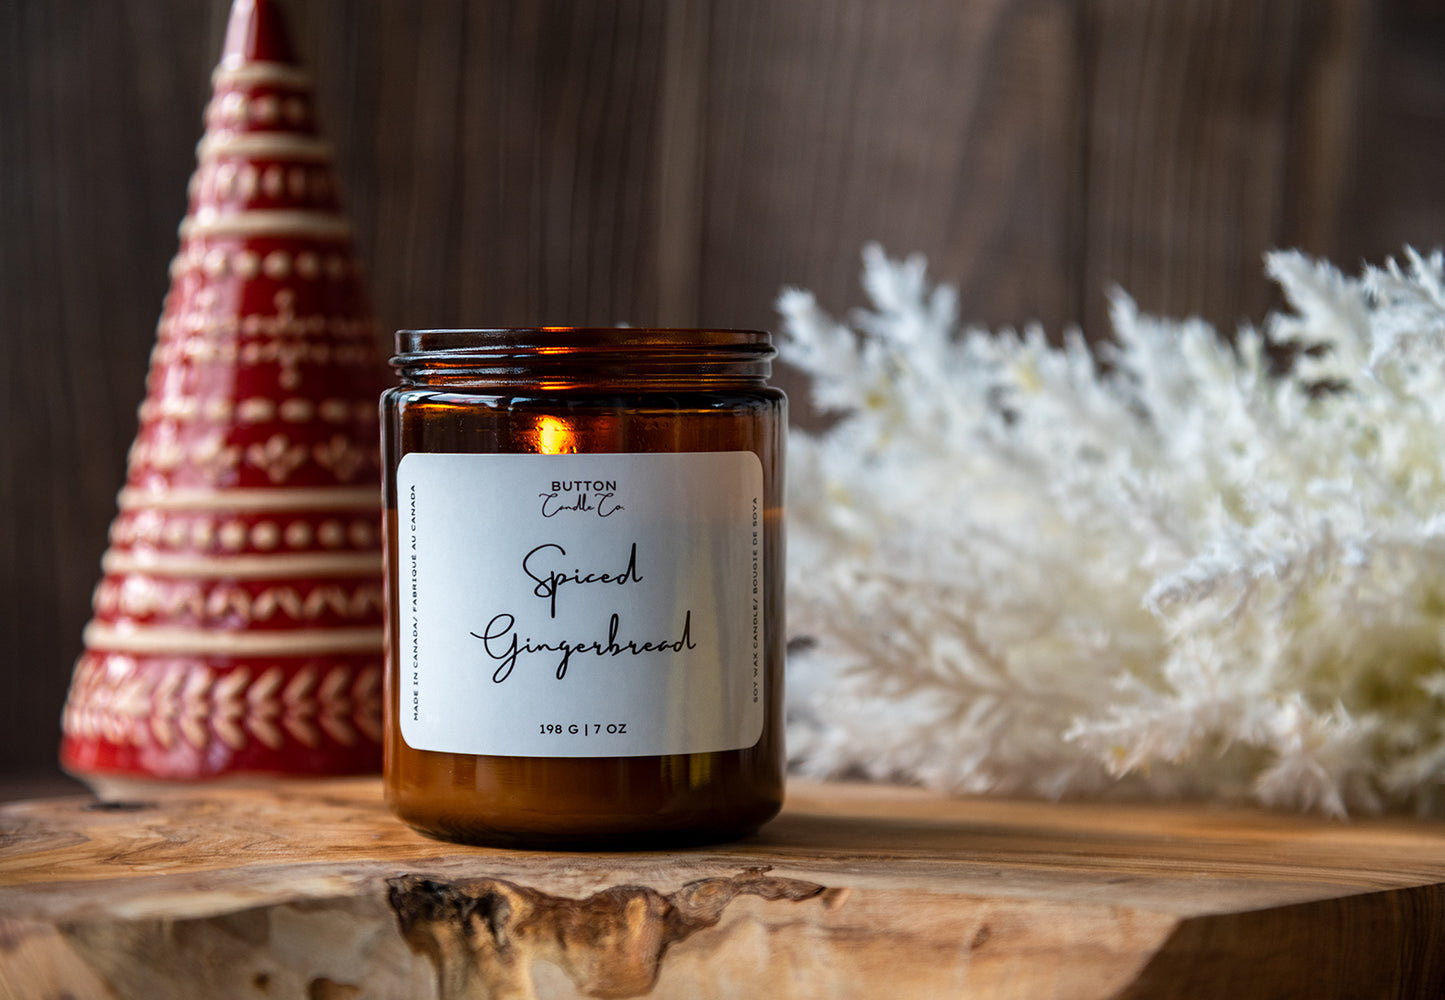 Spiced Gingerbread Candle